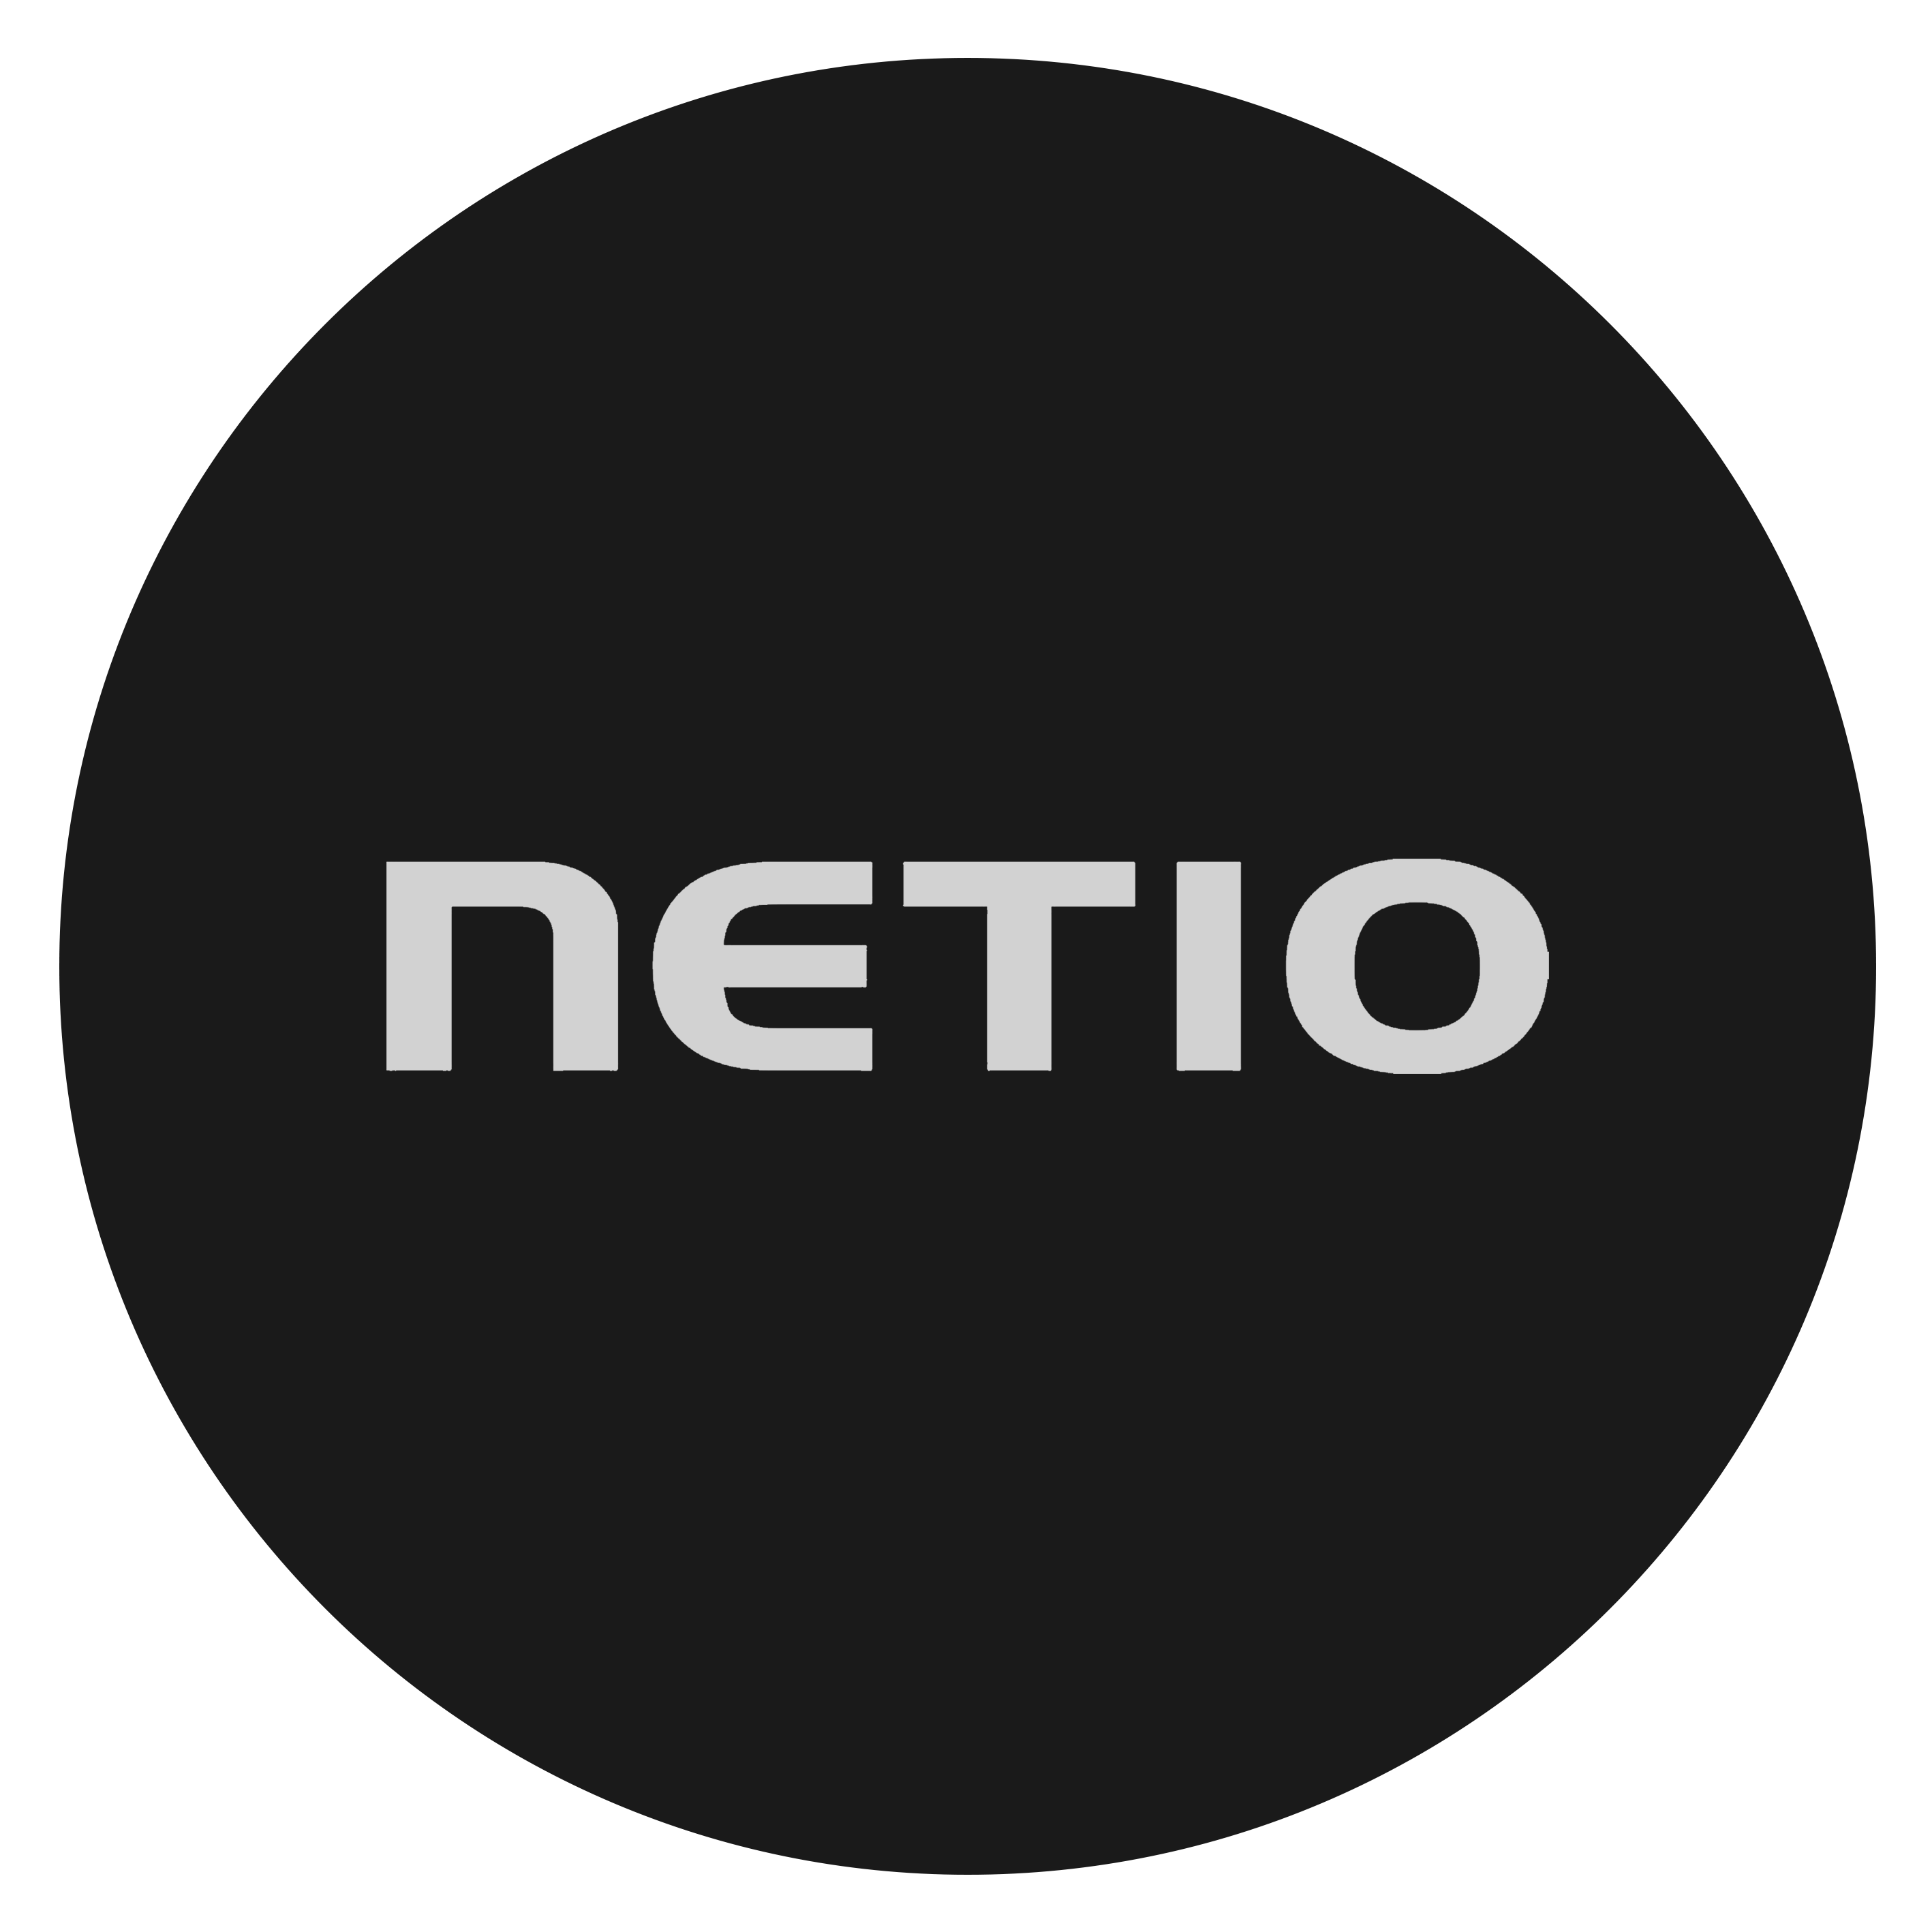 NETIO power switching in uOS